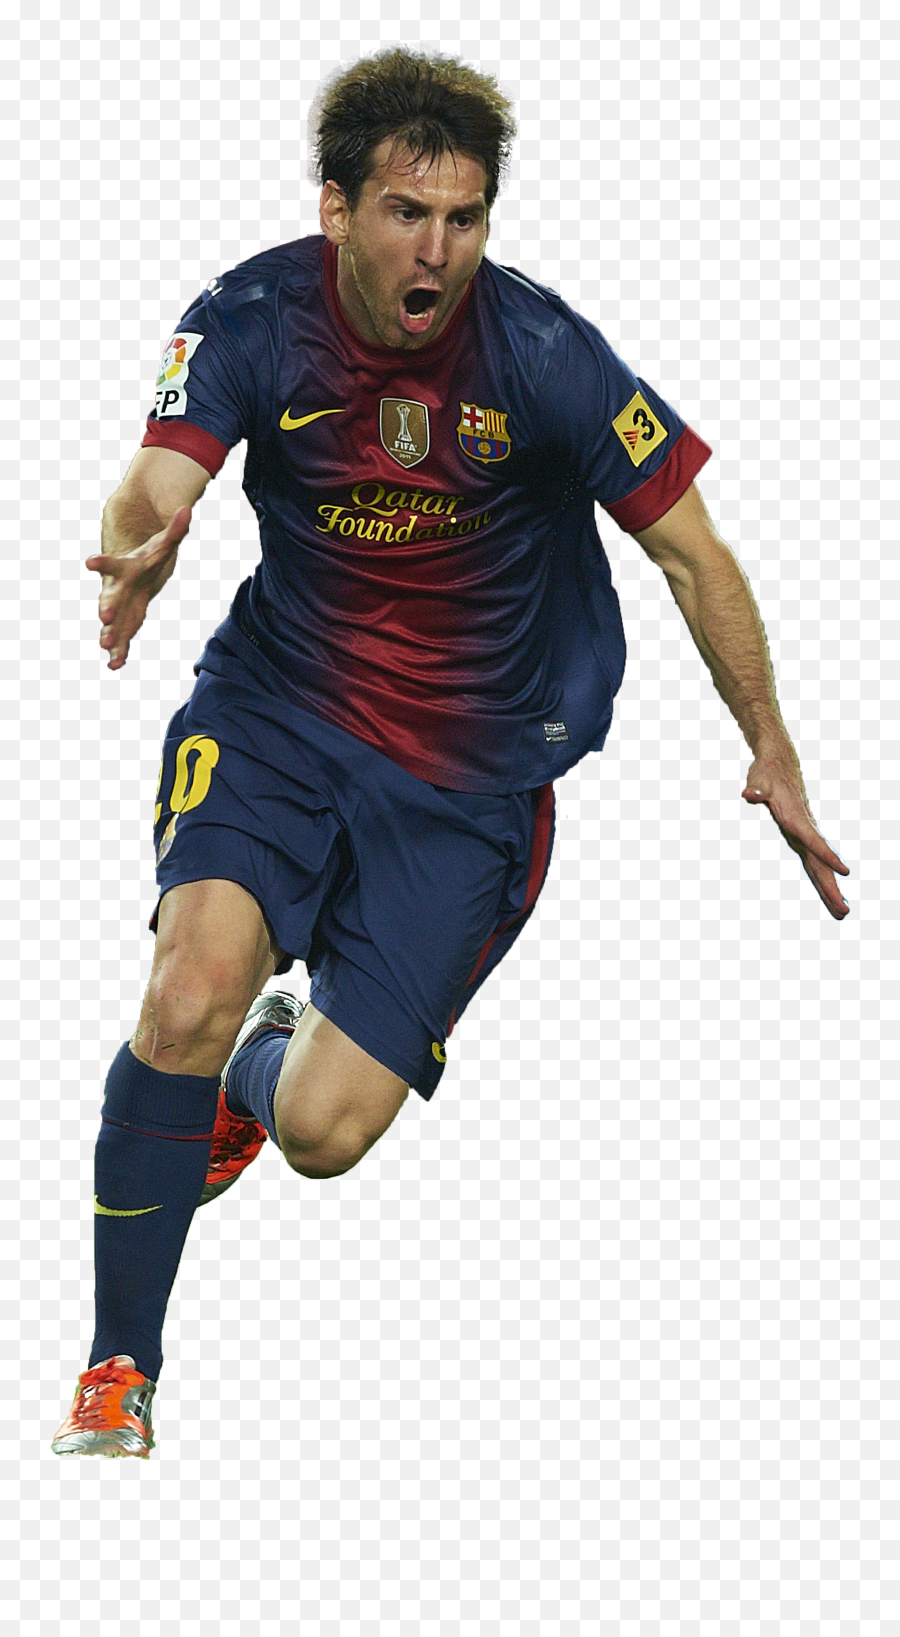 Lionel Messi Full Size Png Download Seekpng - Lionel Messi,Messi Png